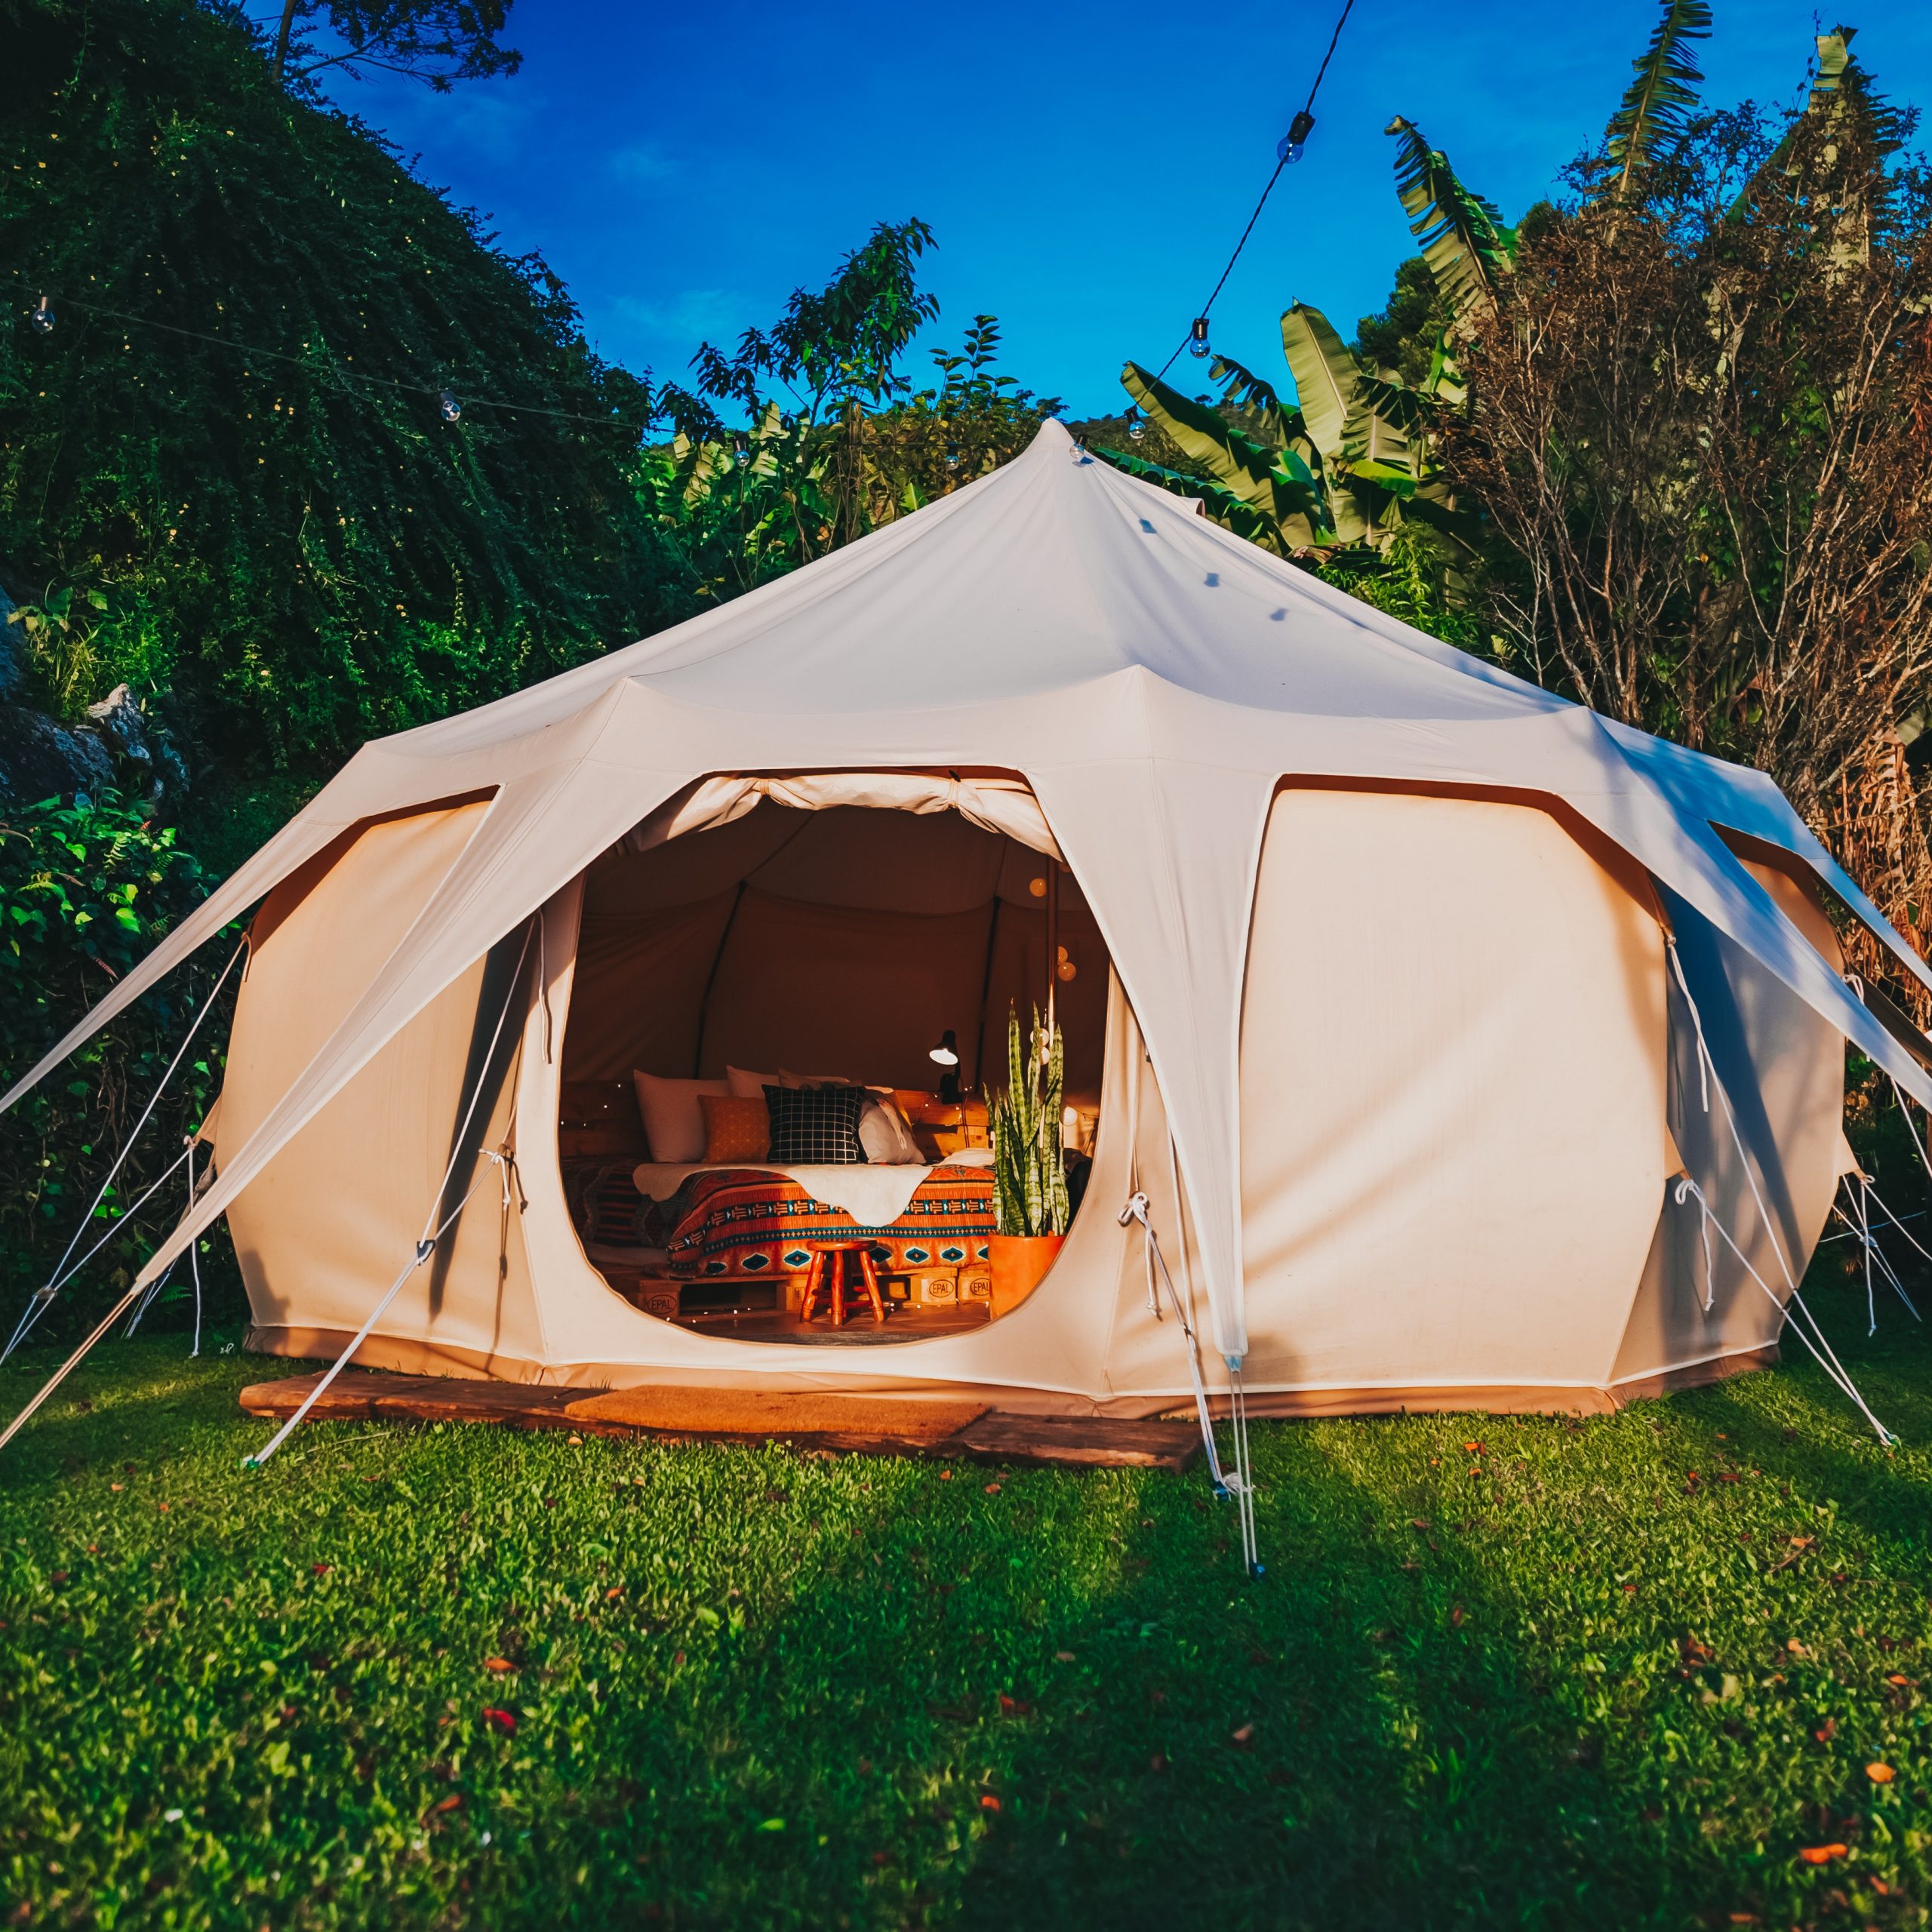 Tent trip with a child – what should I take with me?